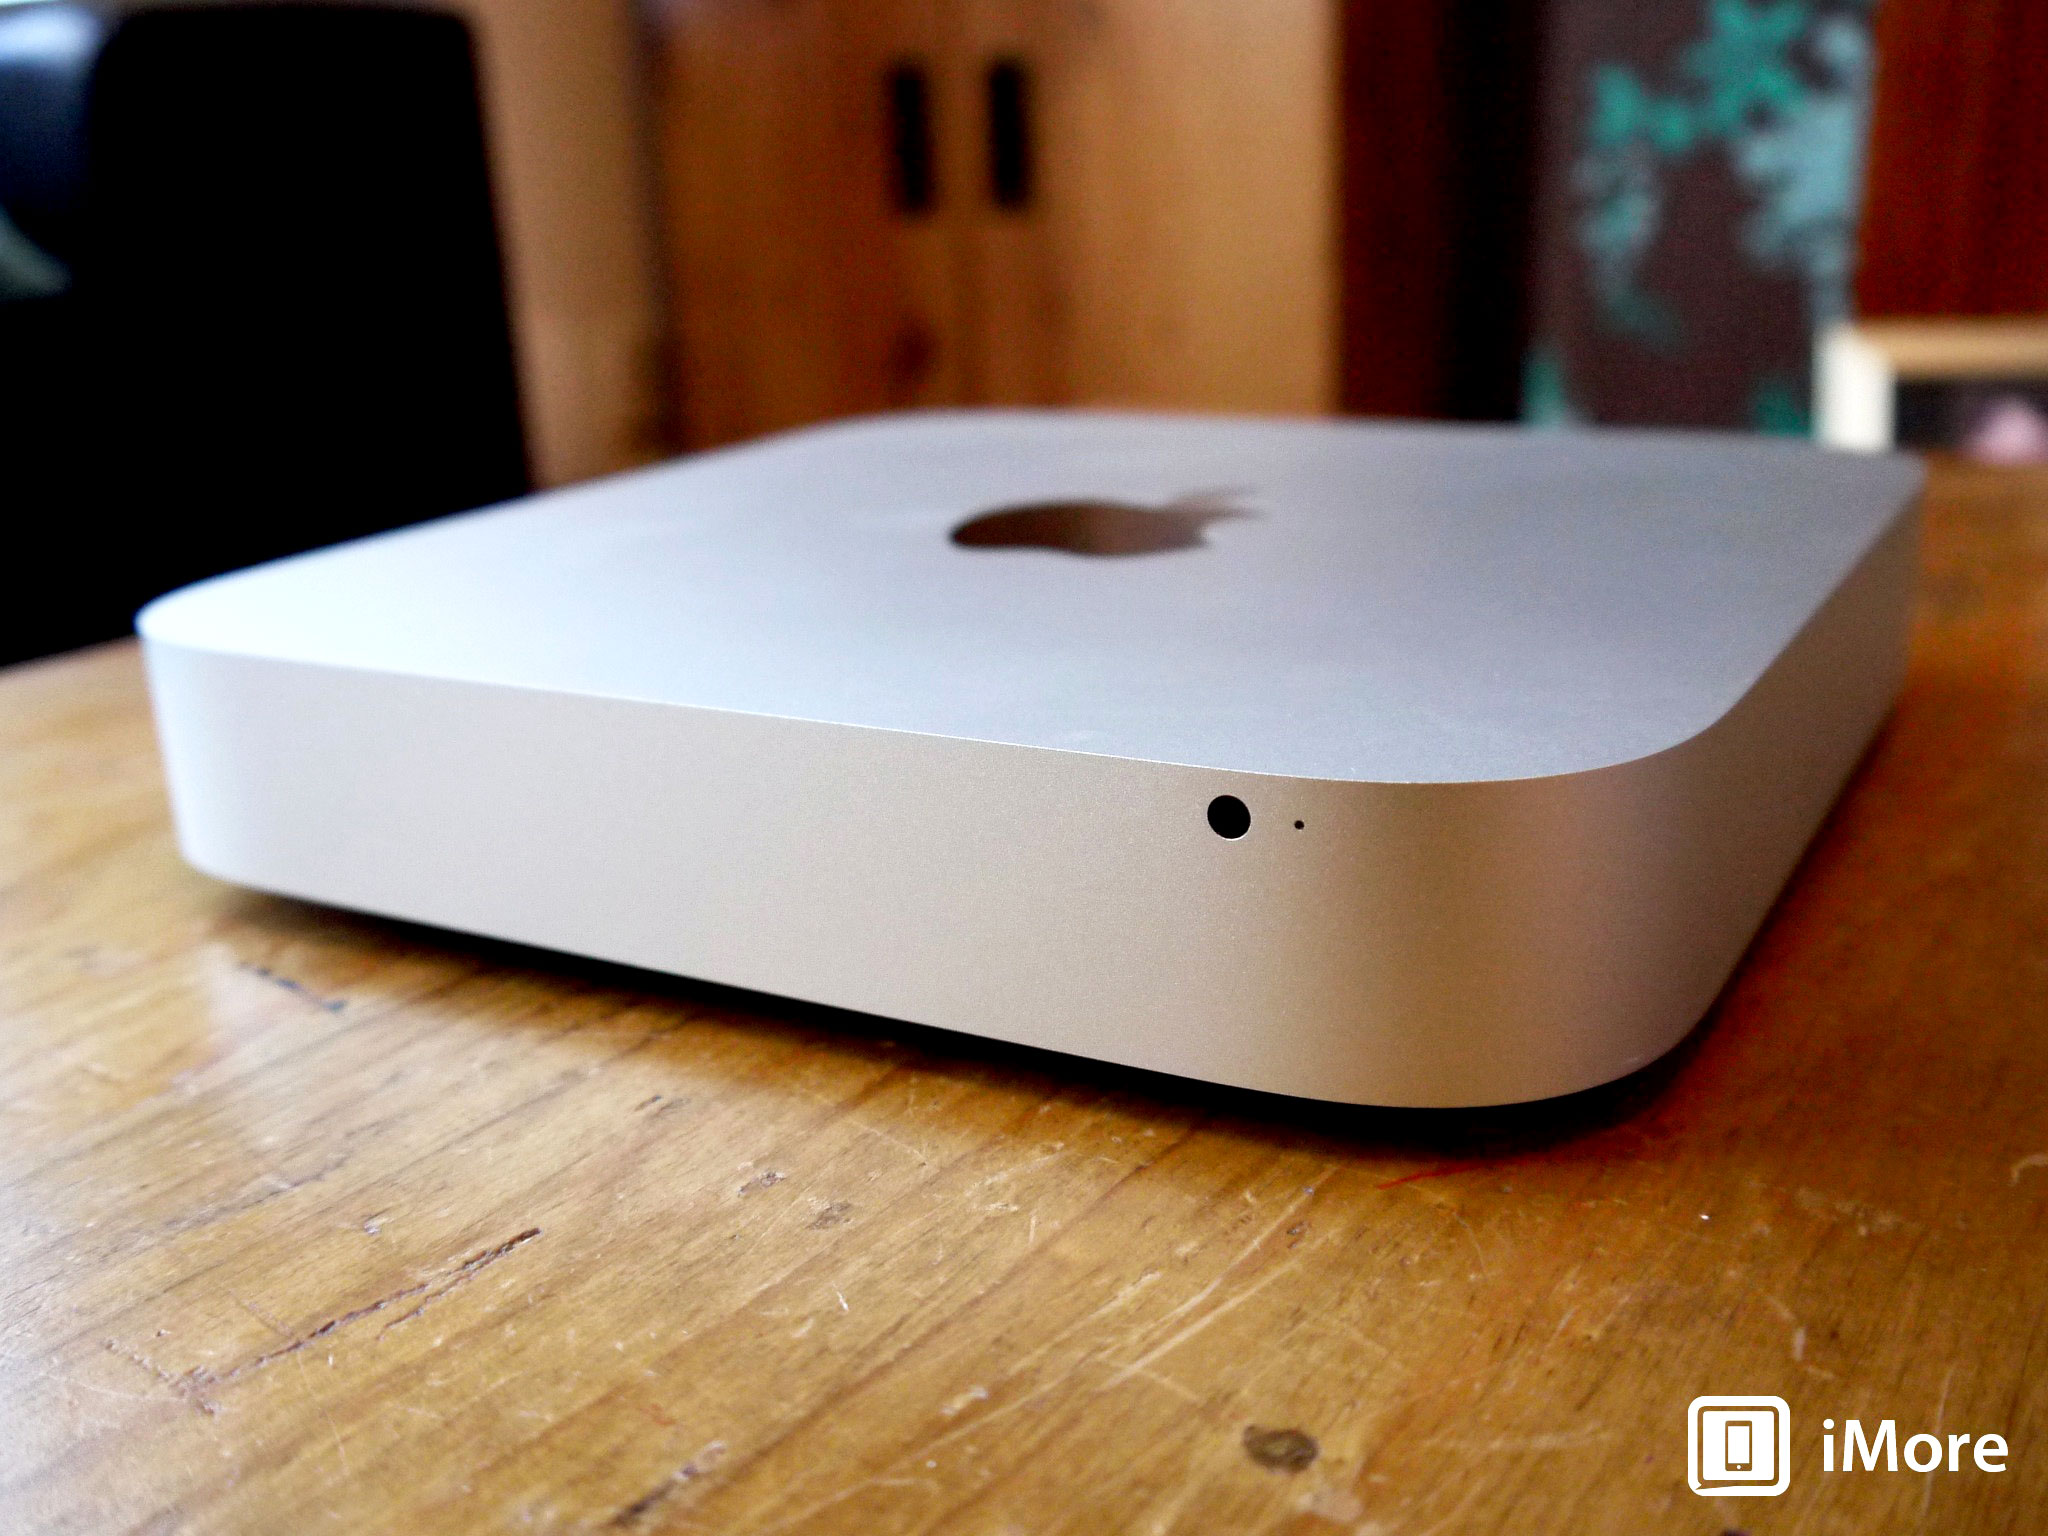 Entry level vs. going all-in: How much Mac do you need?